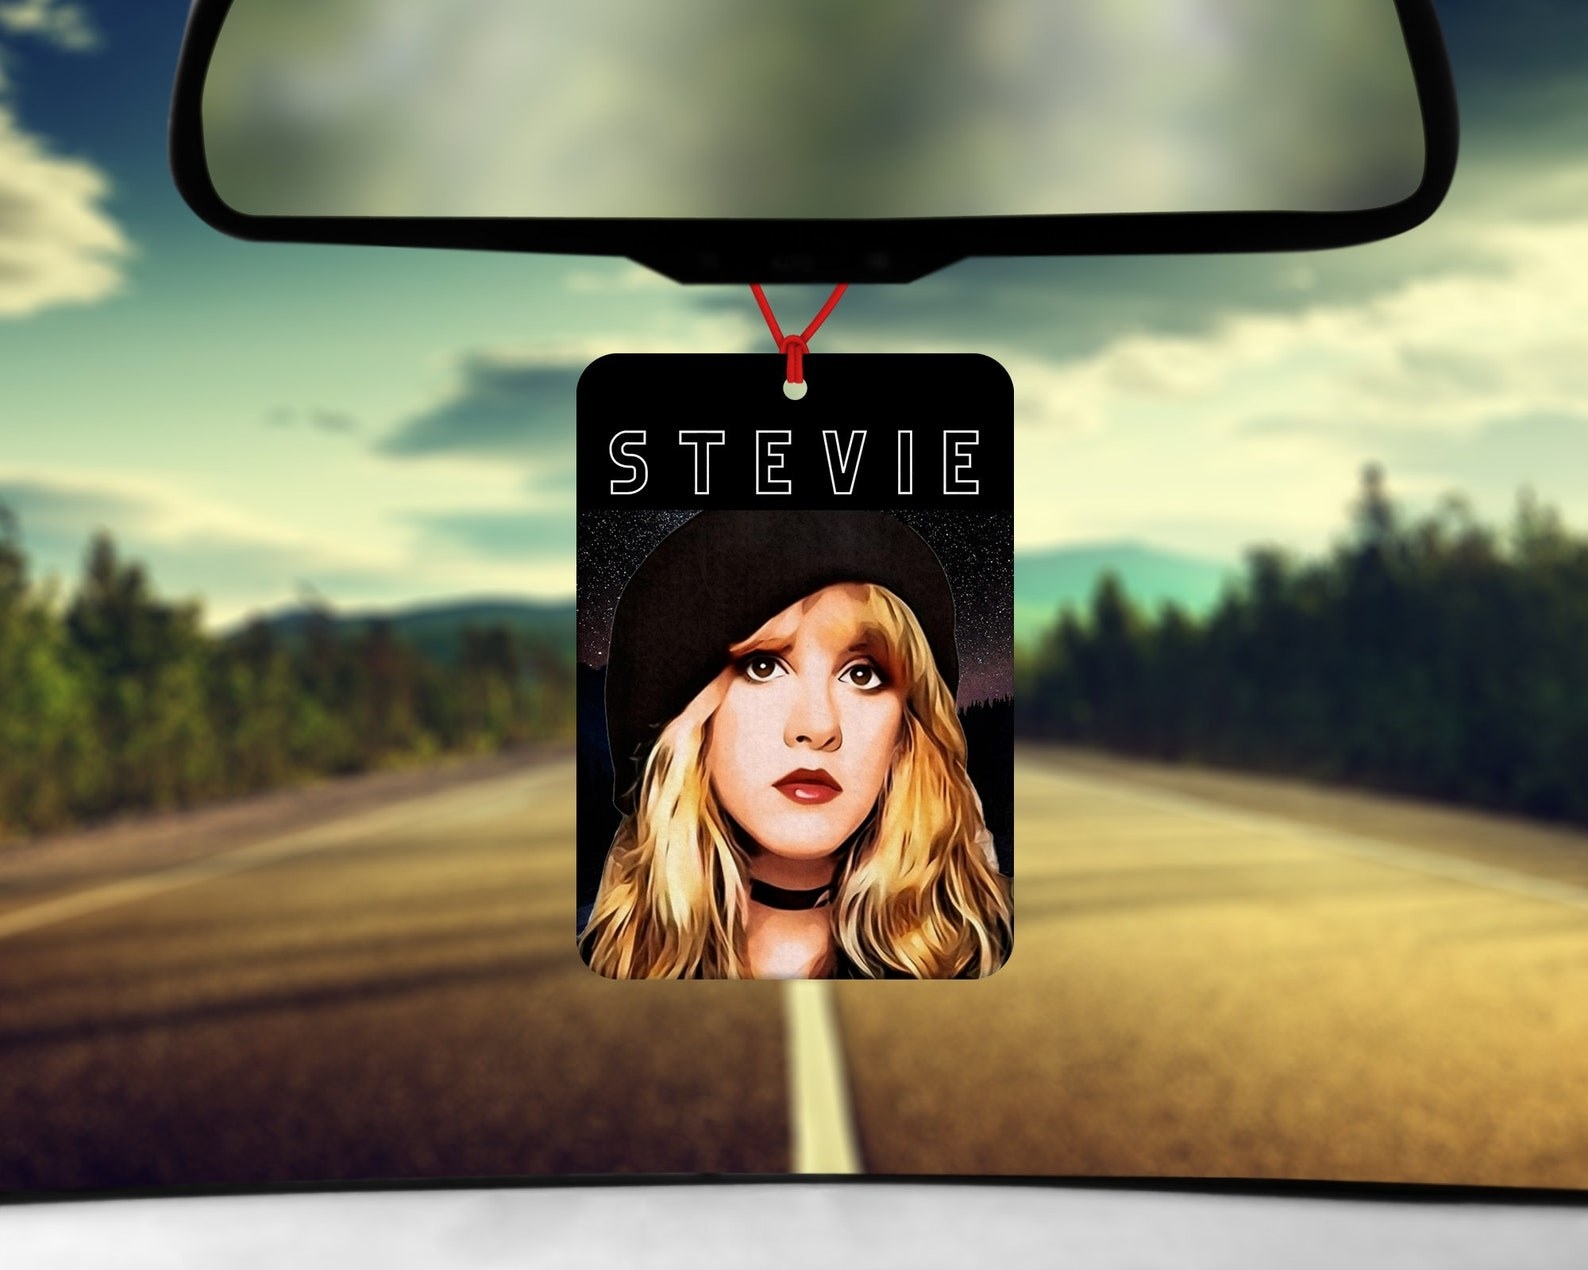 The air freshener which is a photo of a young Stevie Nicks